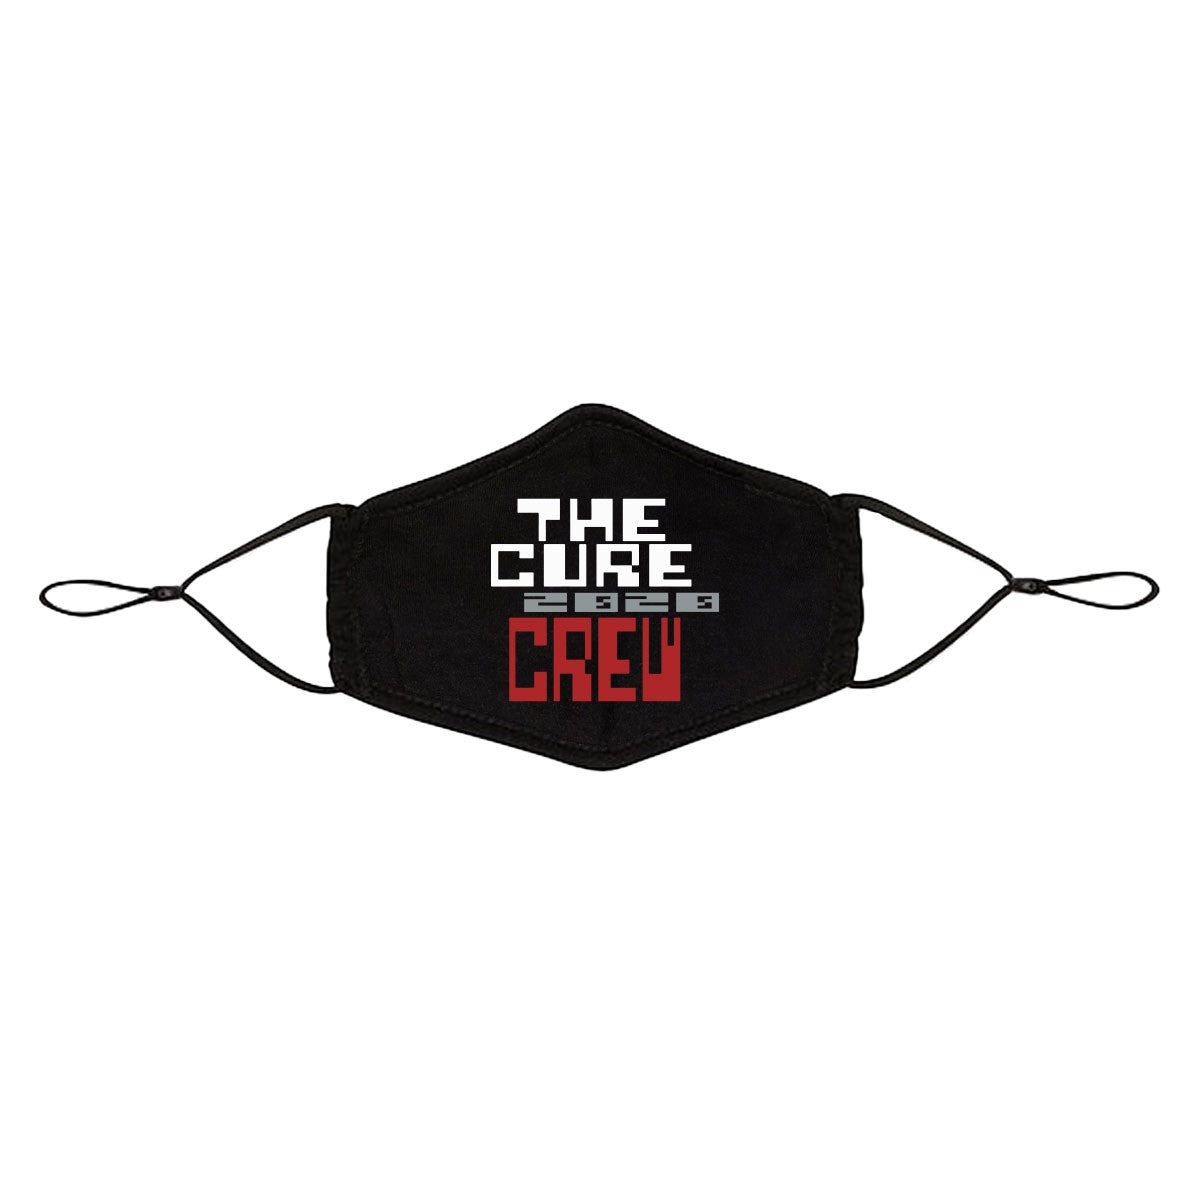 The Cure 2020 Crew Adjustable Face Mask